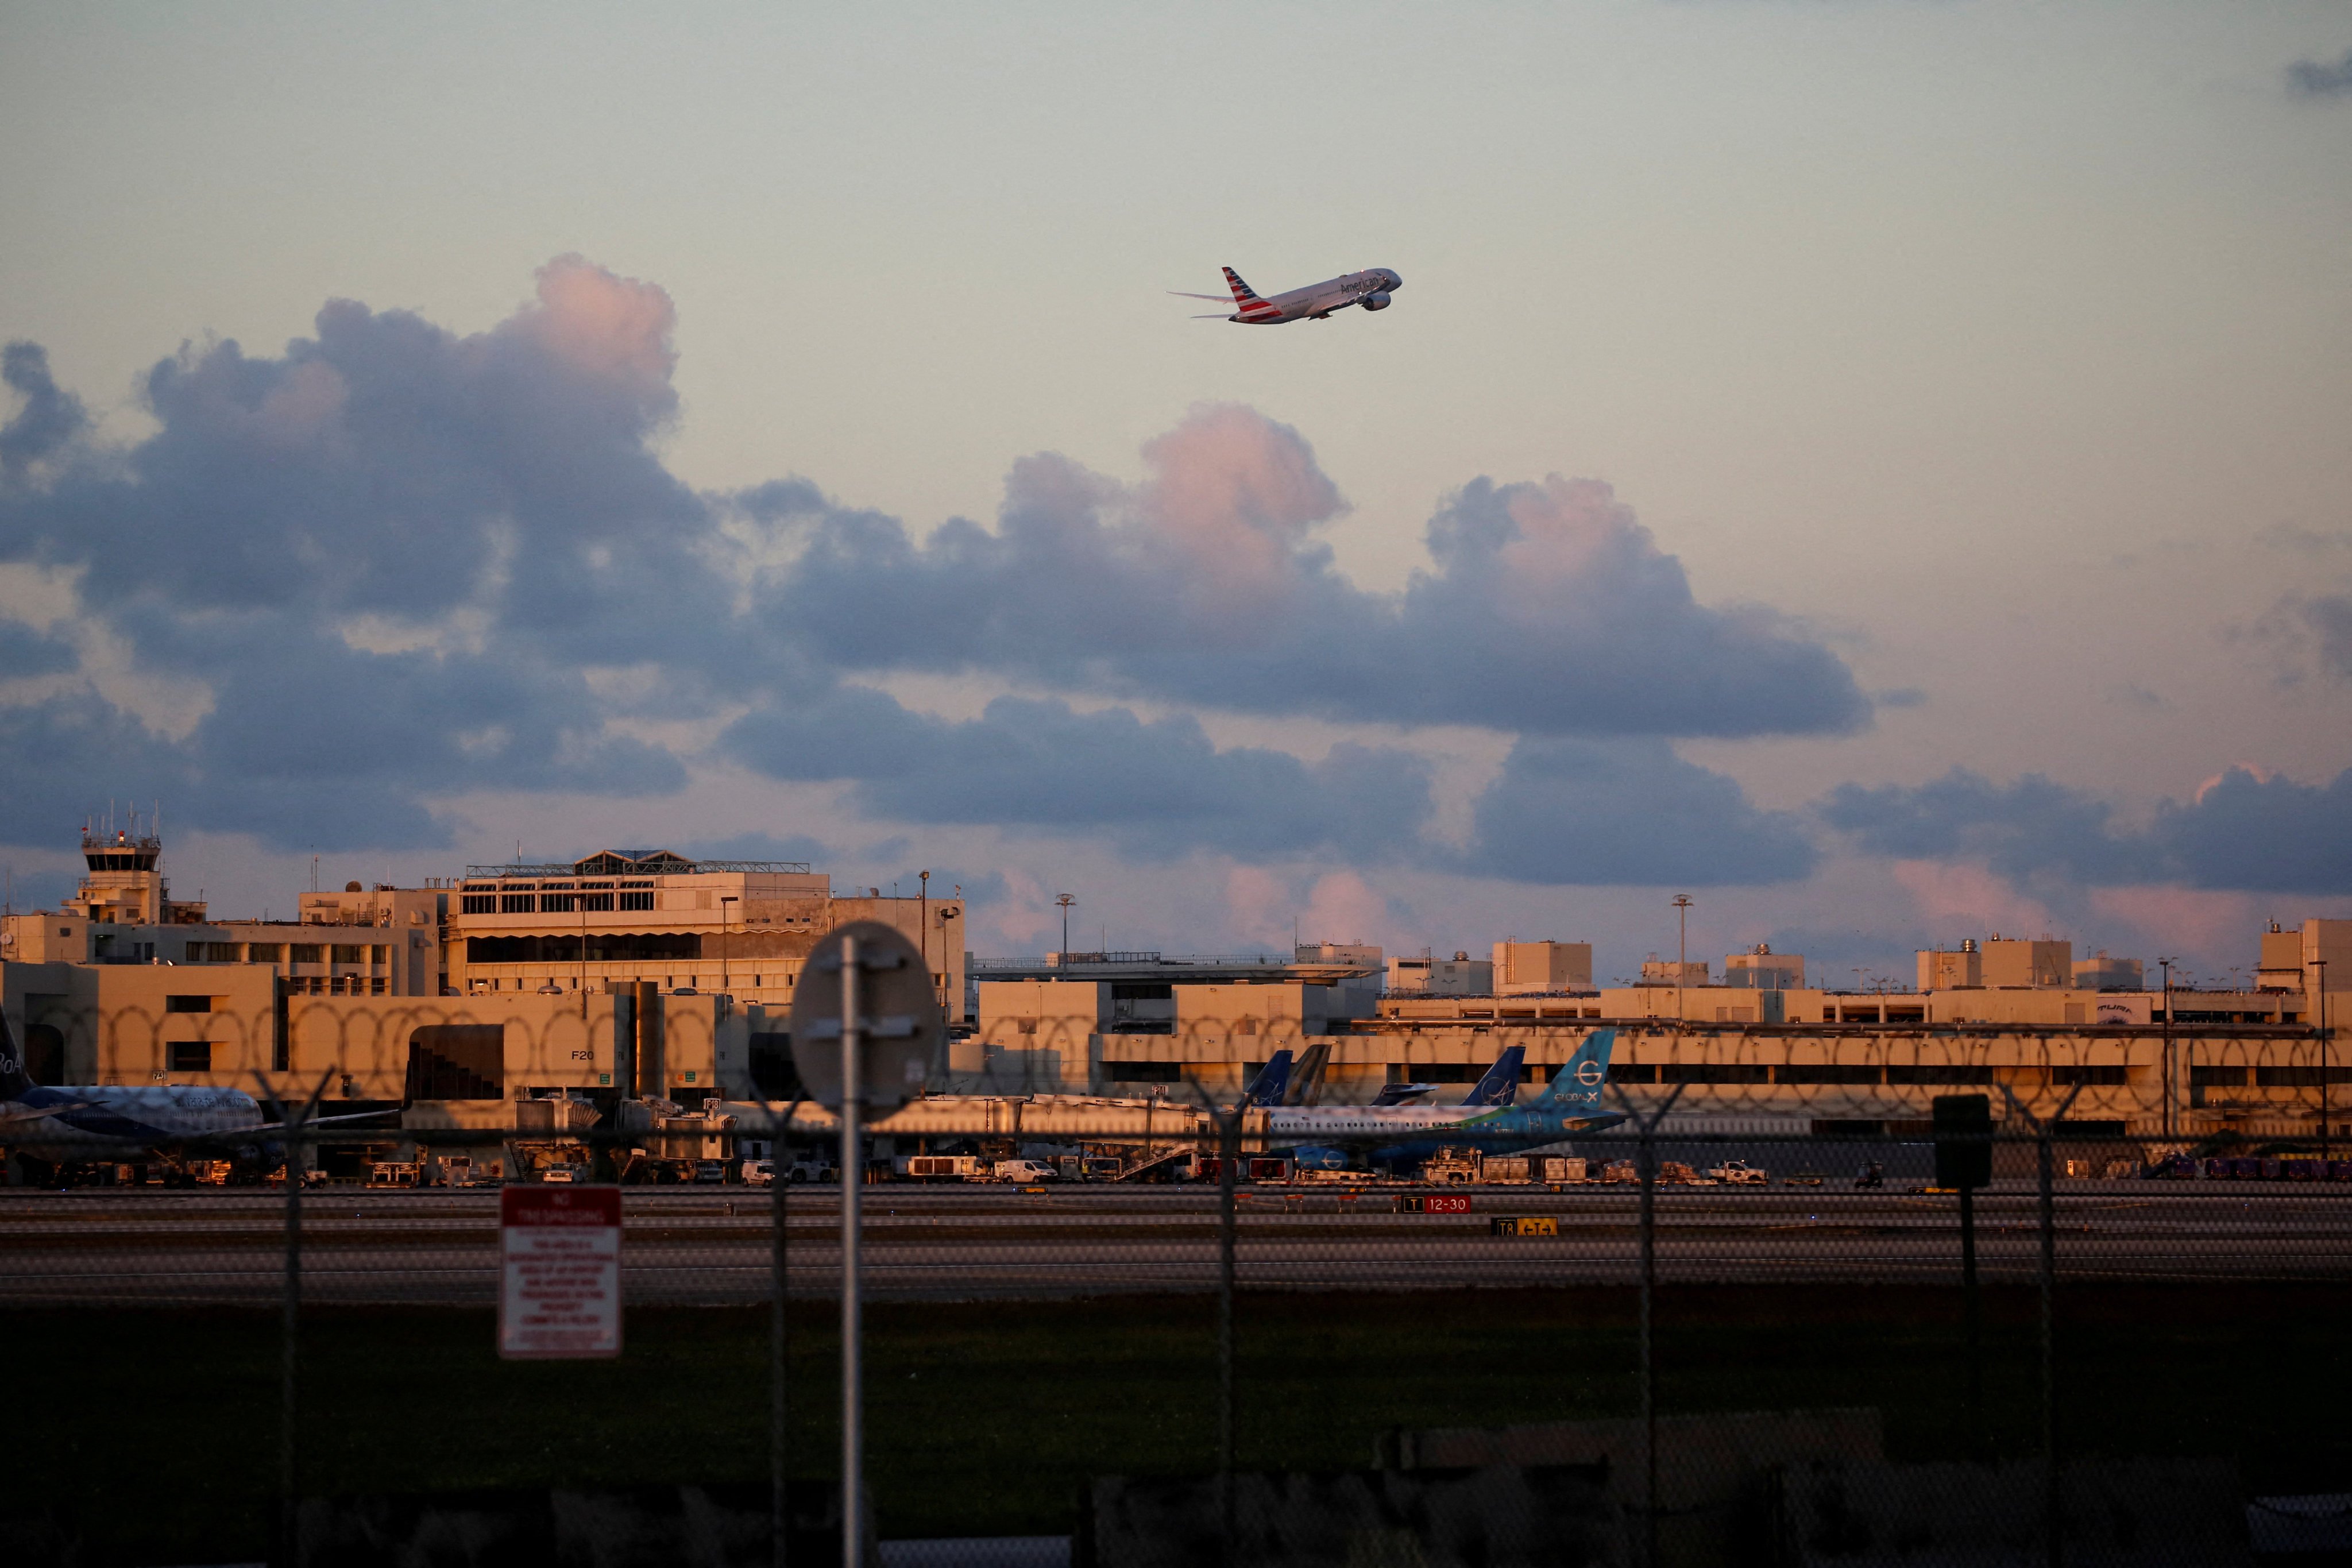 An American Airlines plane takes off from a US airport. This marks the third time since November 2022 that a passenger travelling from New York to New Delhi has been accused of urinating on or near other passengers, and the second time it has happened specifically on American Airlines flight 292. Photo: Reuters